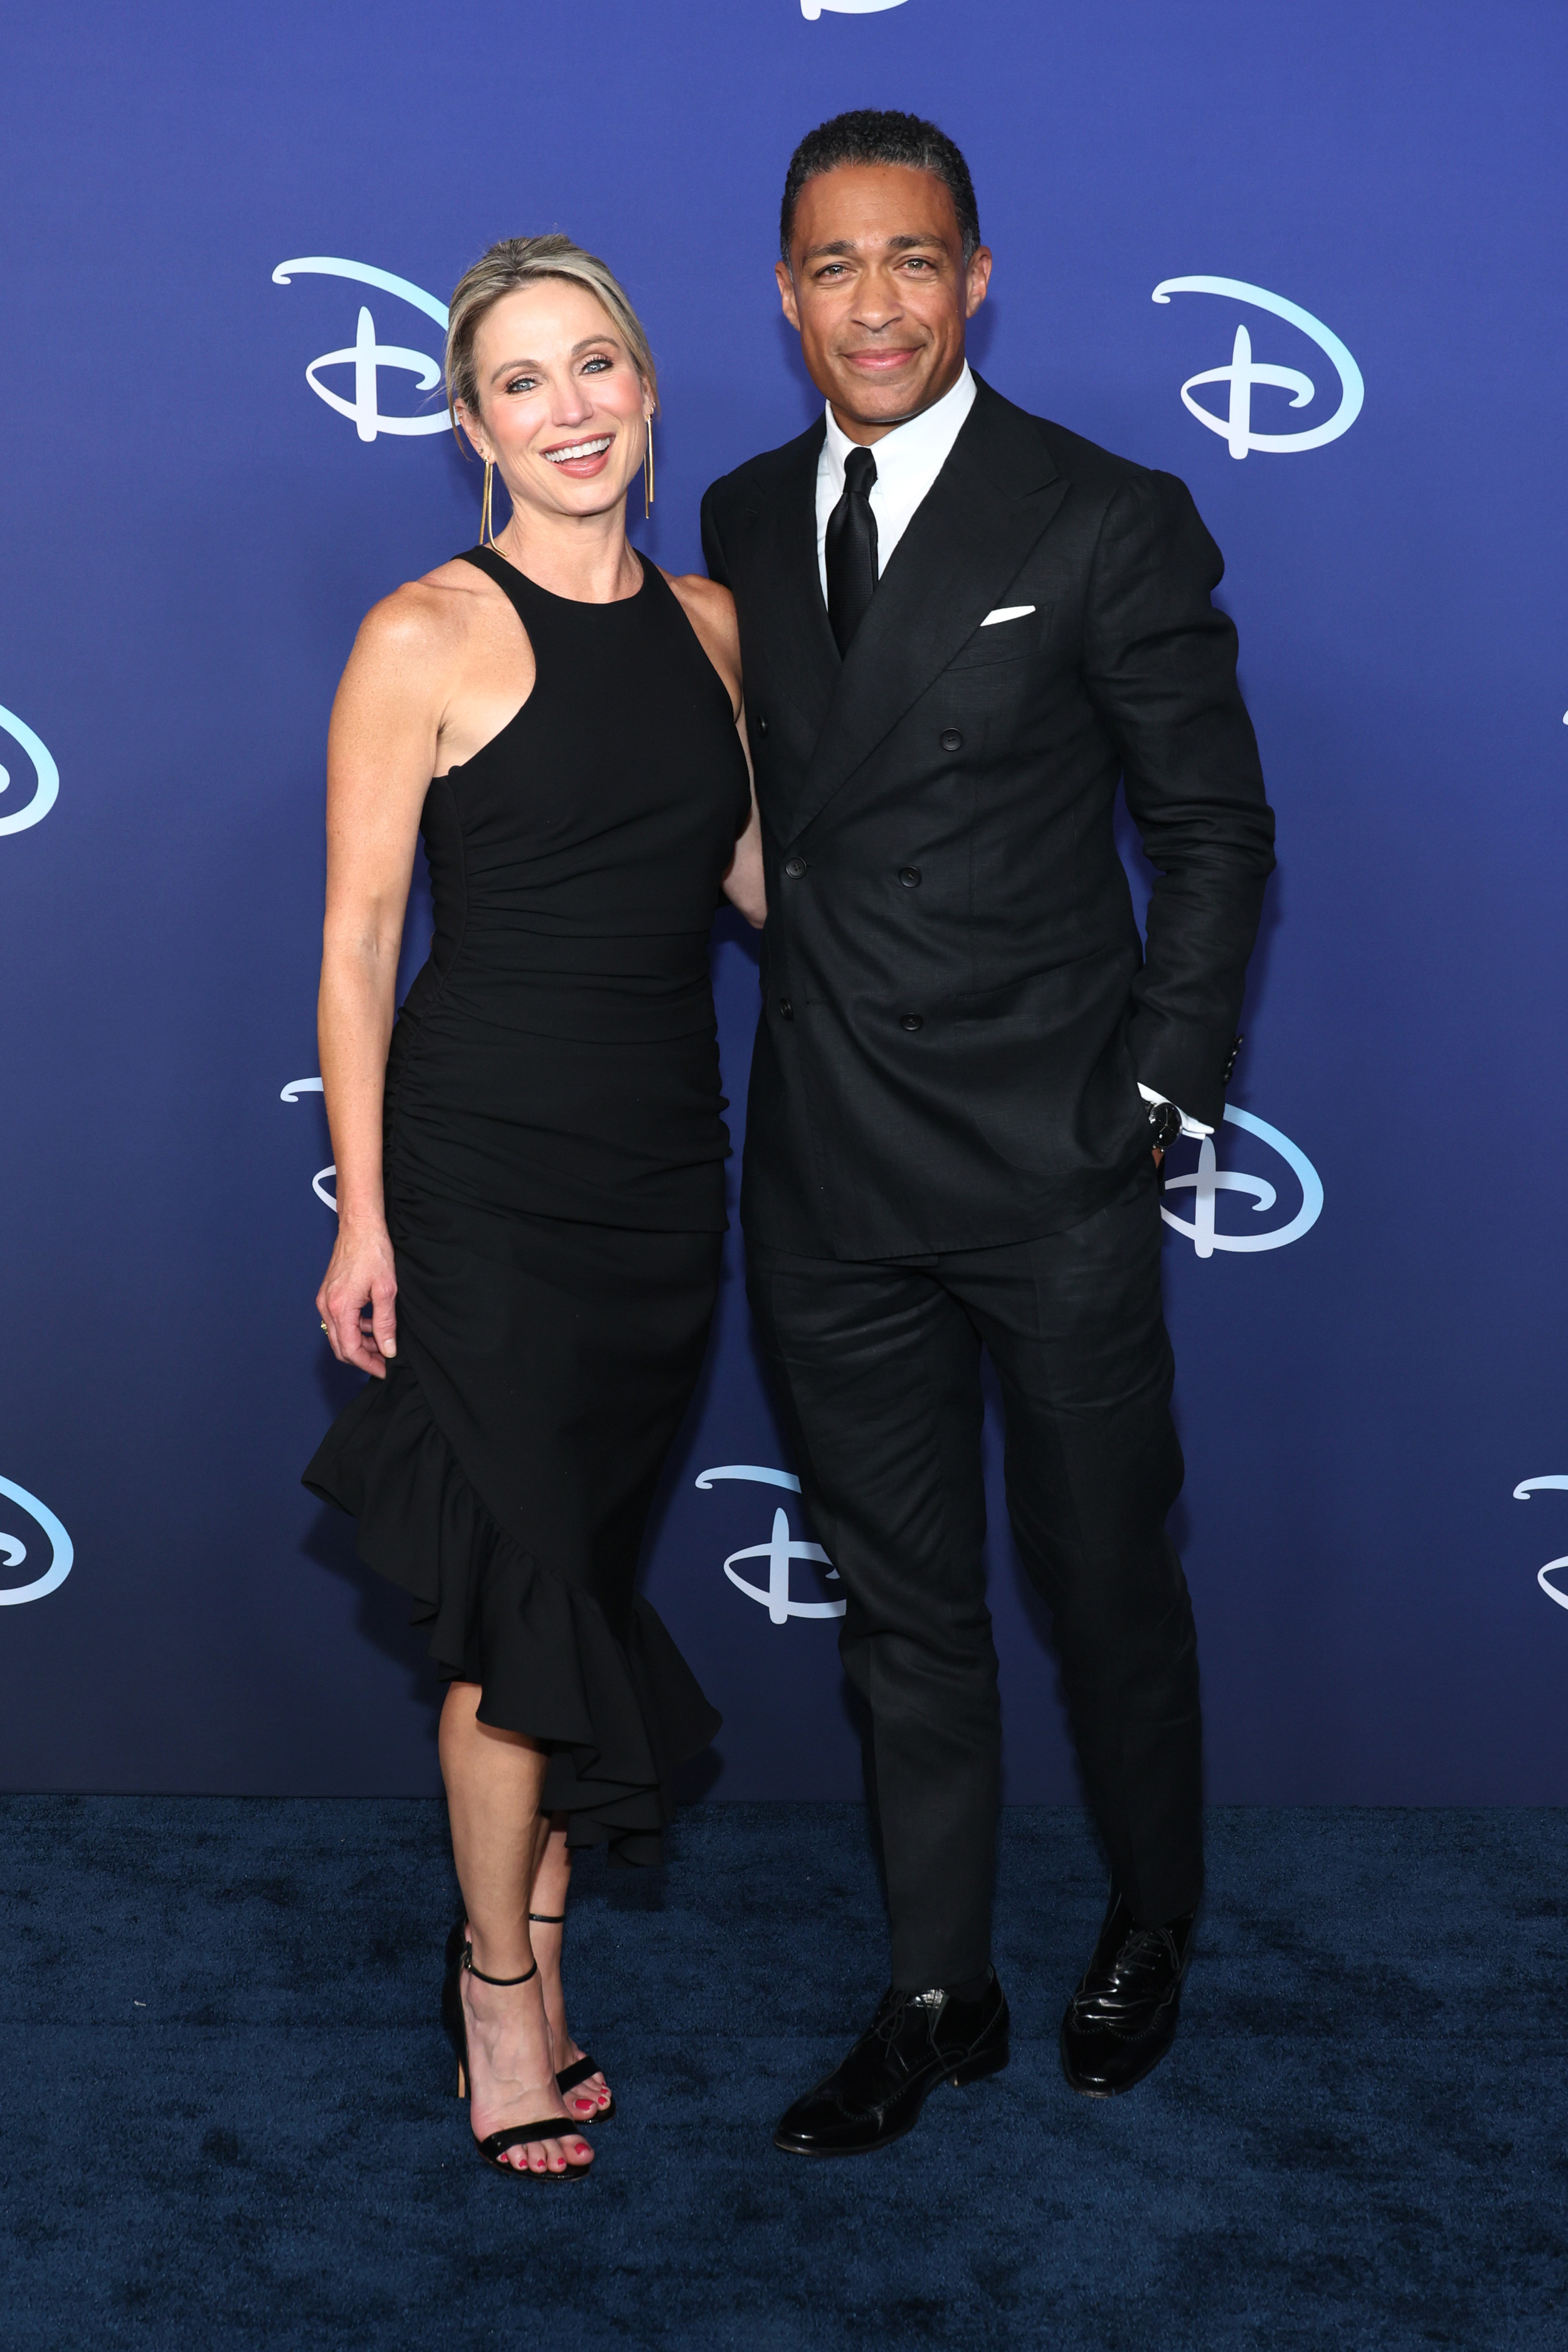 GMA3' anchors Amy Robach and T.J. Holmes depart ABC after reported romantic  relationship